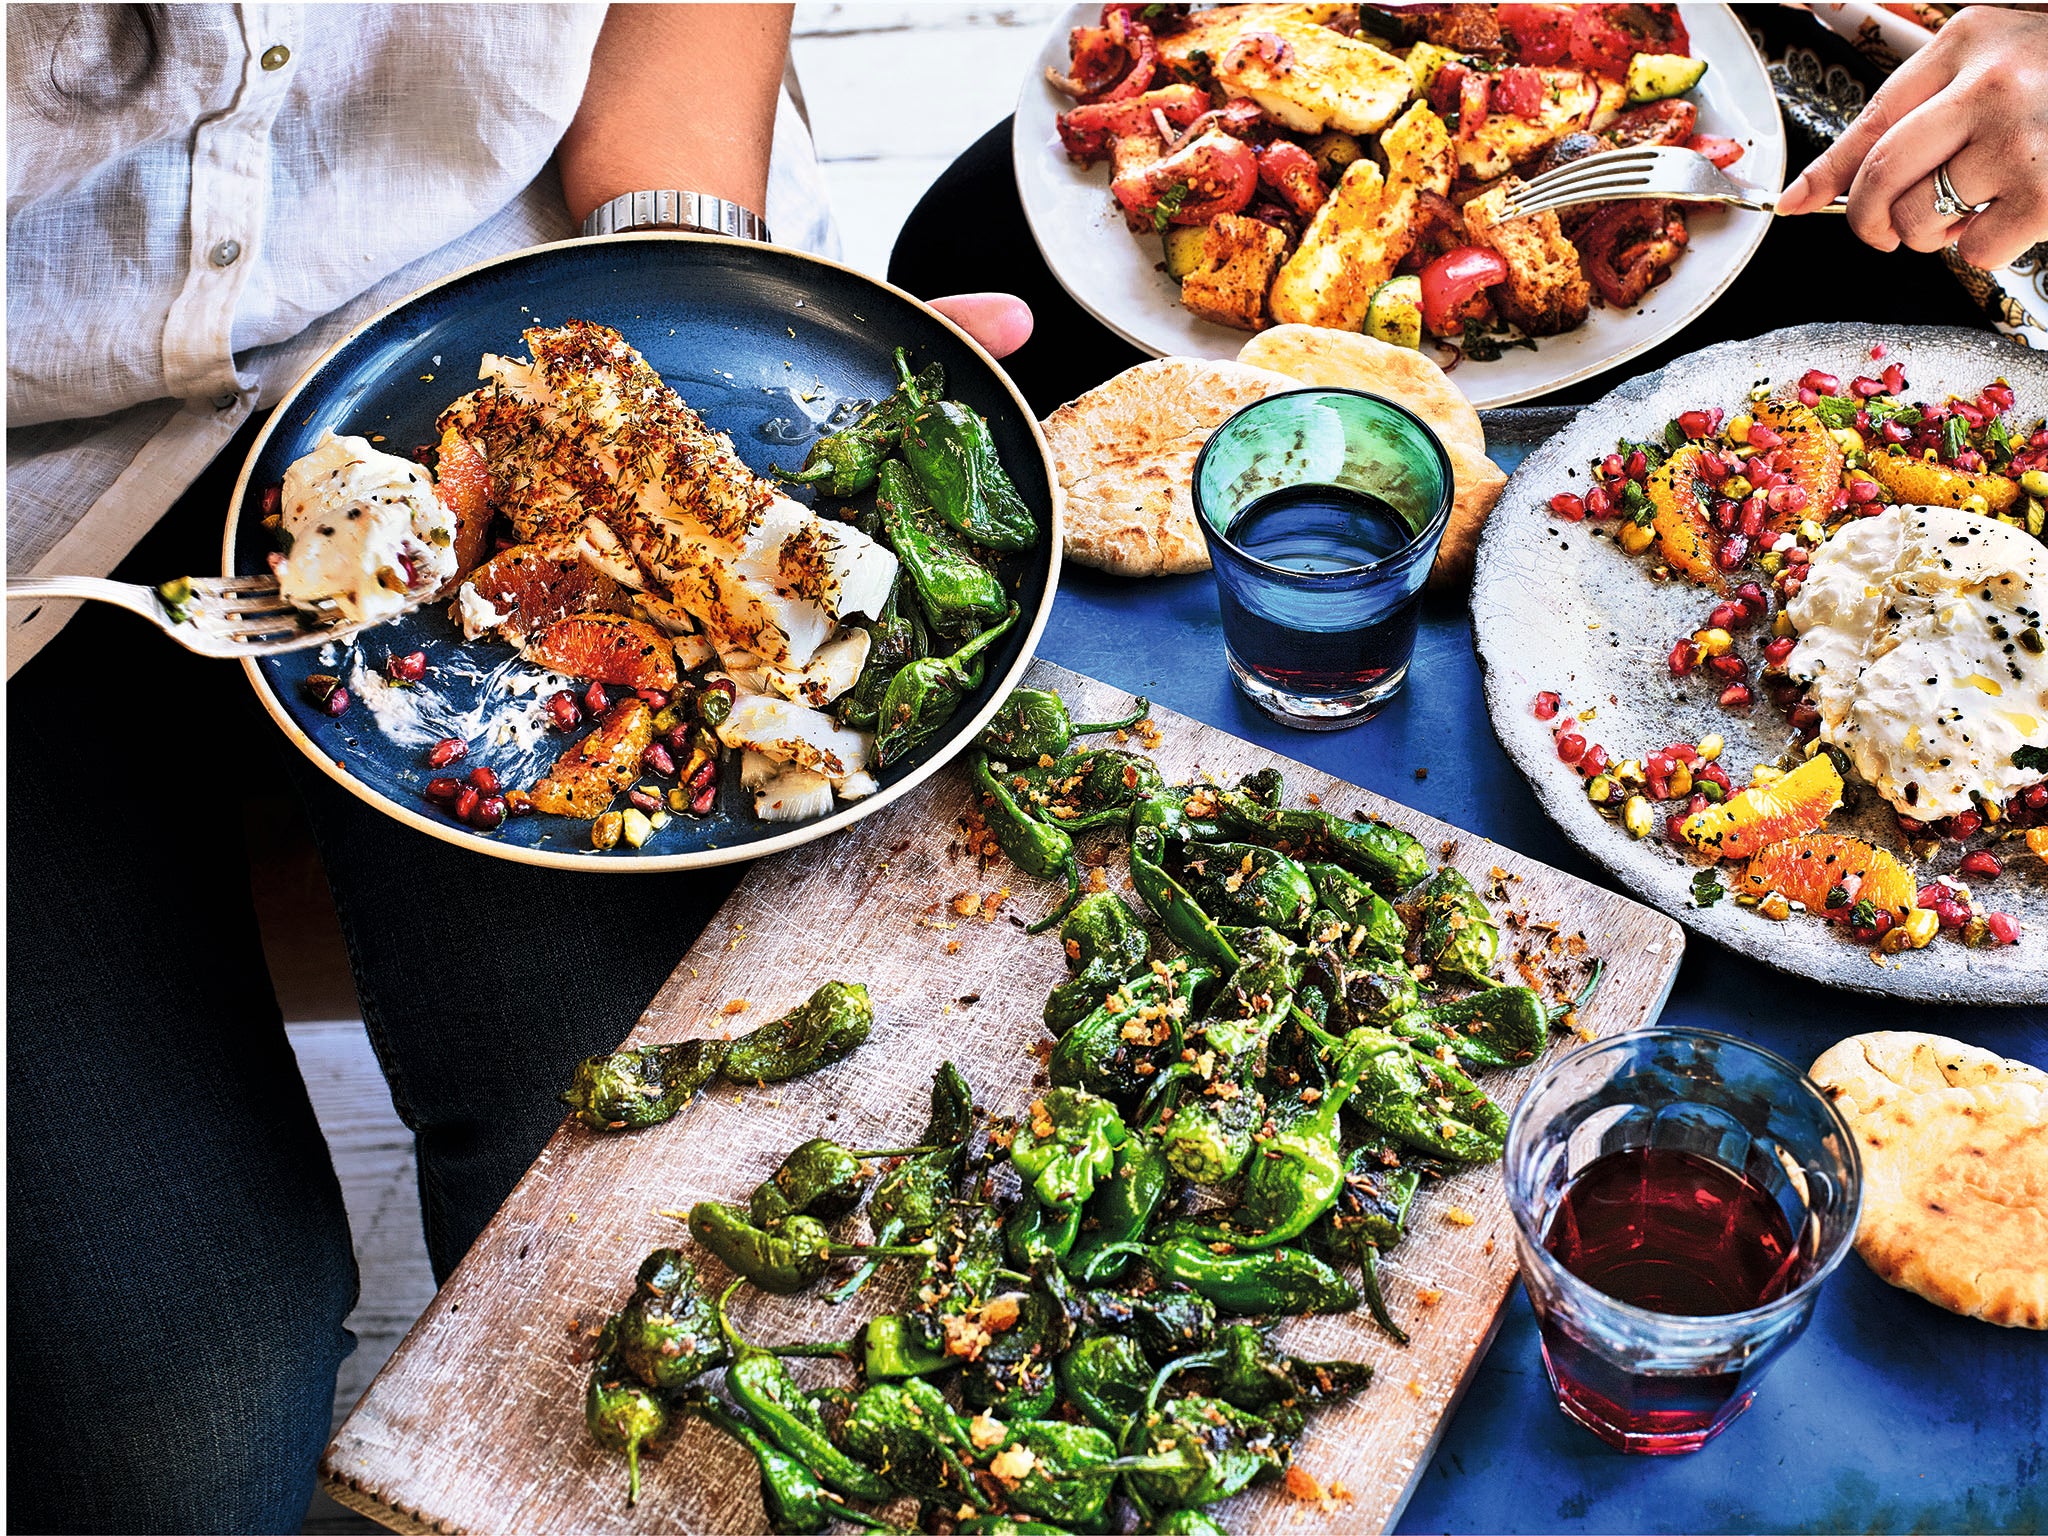 The bestselling author’s latest dishes nod to a range of influences, with a generous sprinkling of Shiraz and Isfahan